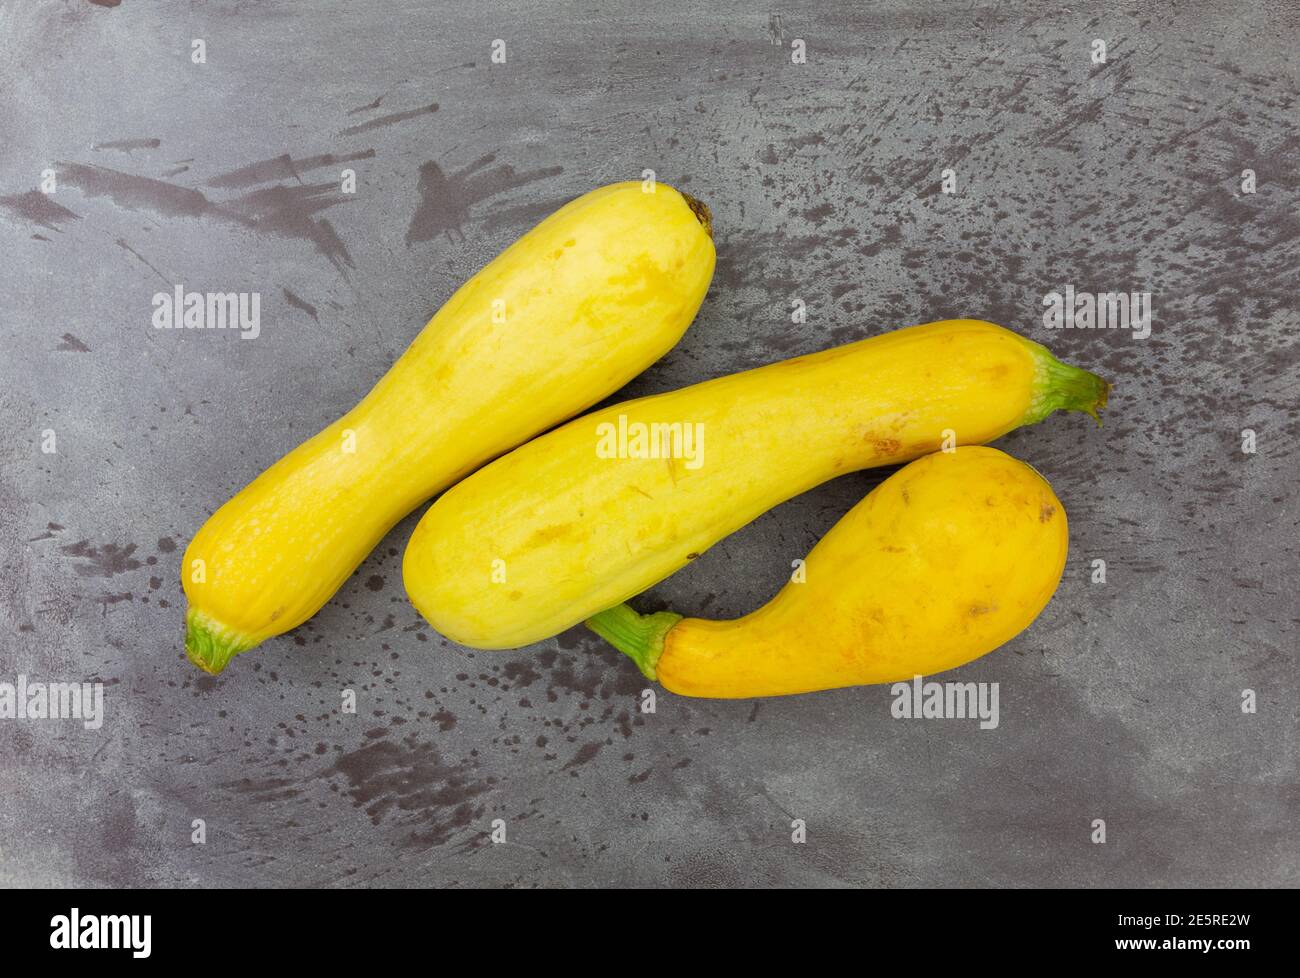 Group of home garden grown yellow summer squash on a gray mottled background. Stock Photo